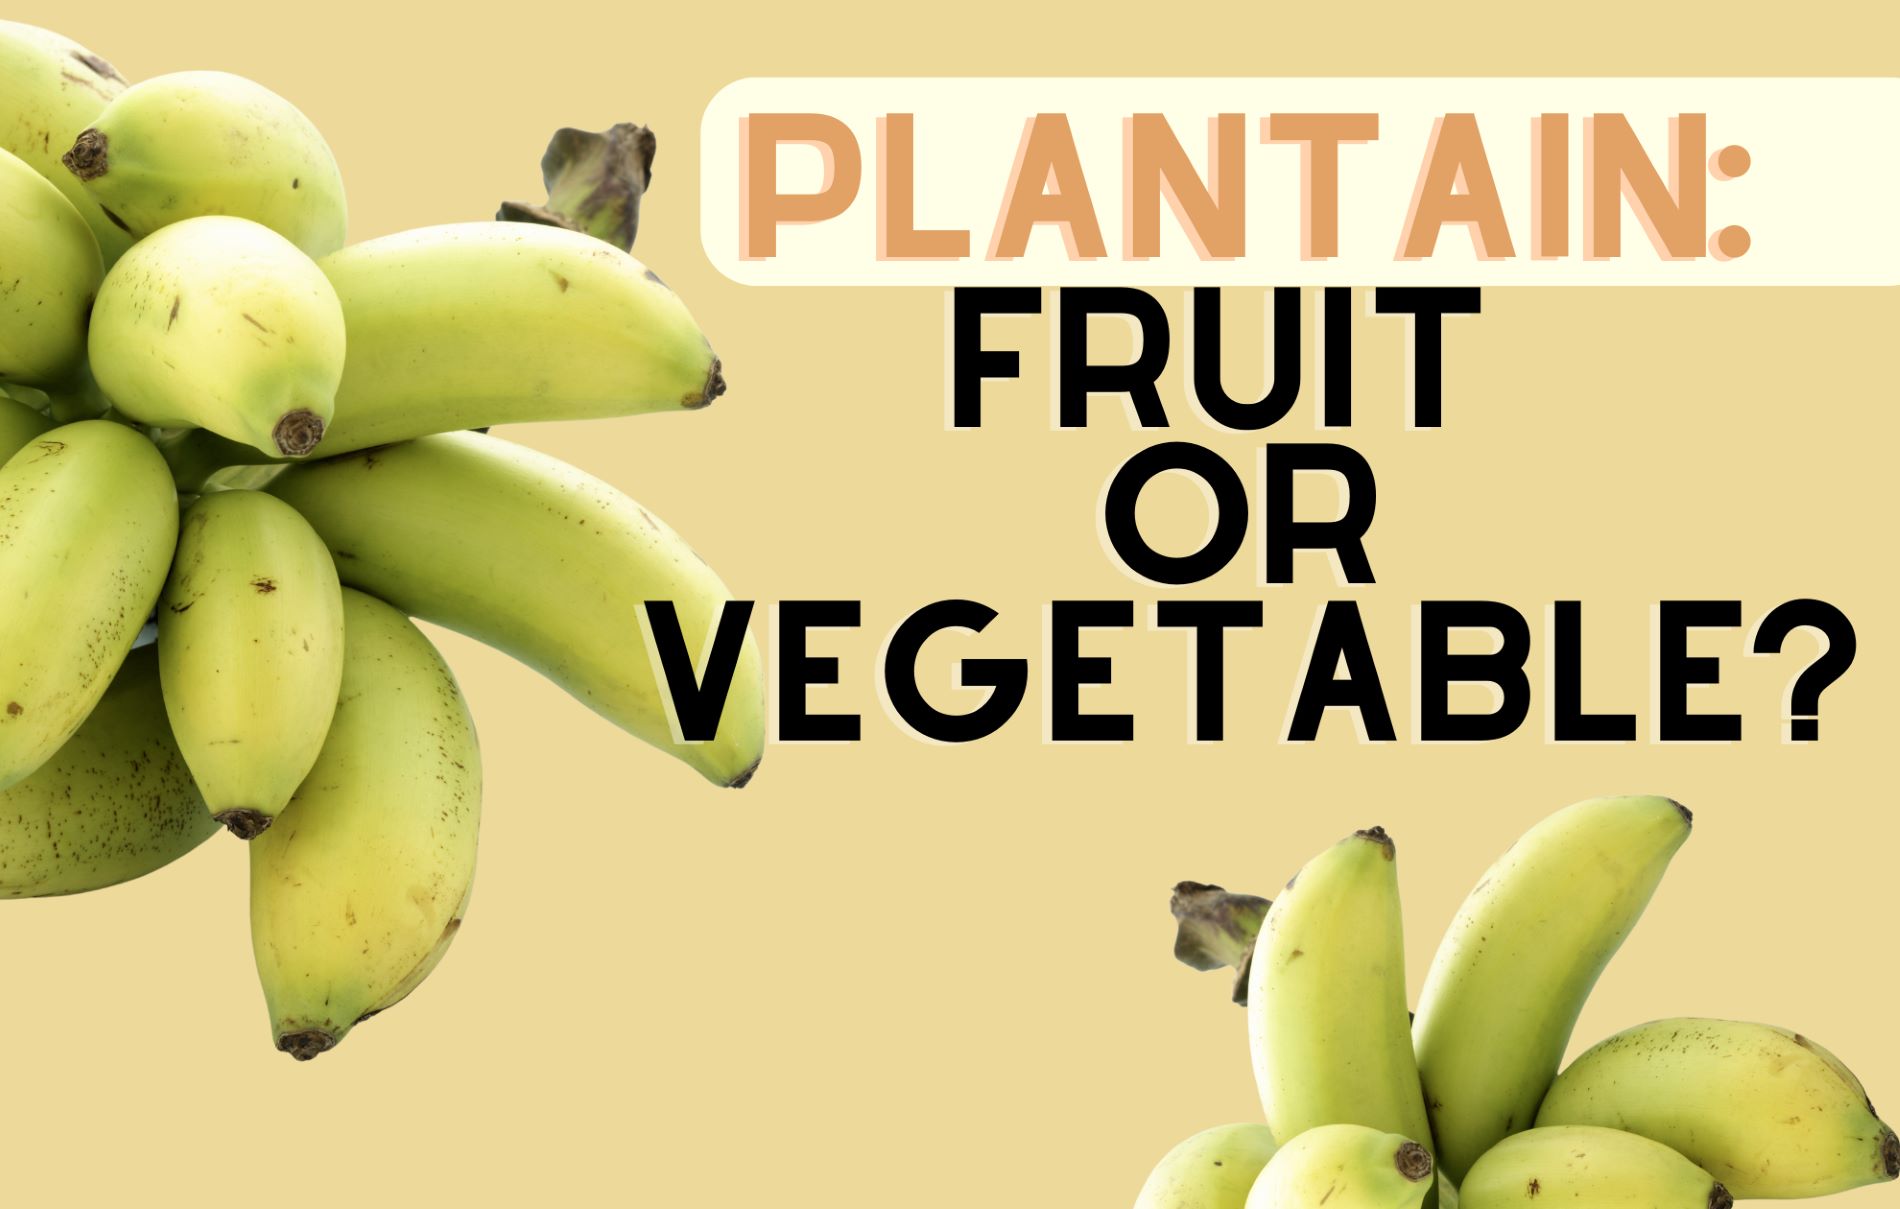 Is the Plantain a Fruit or Vegetable?